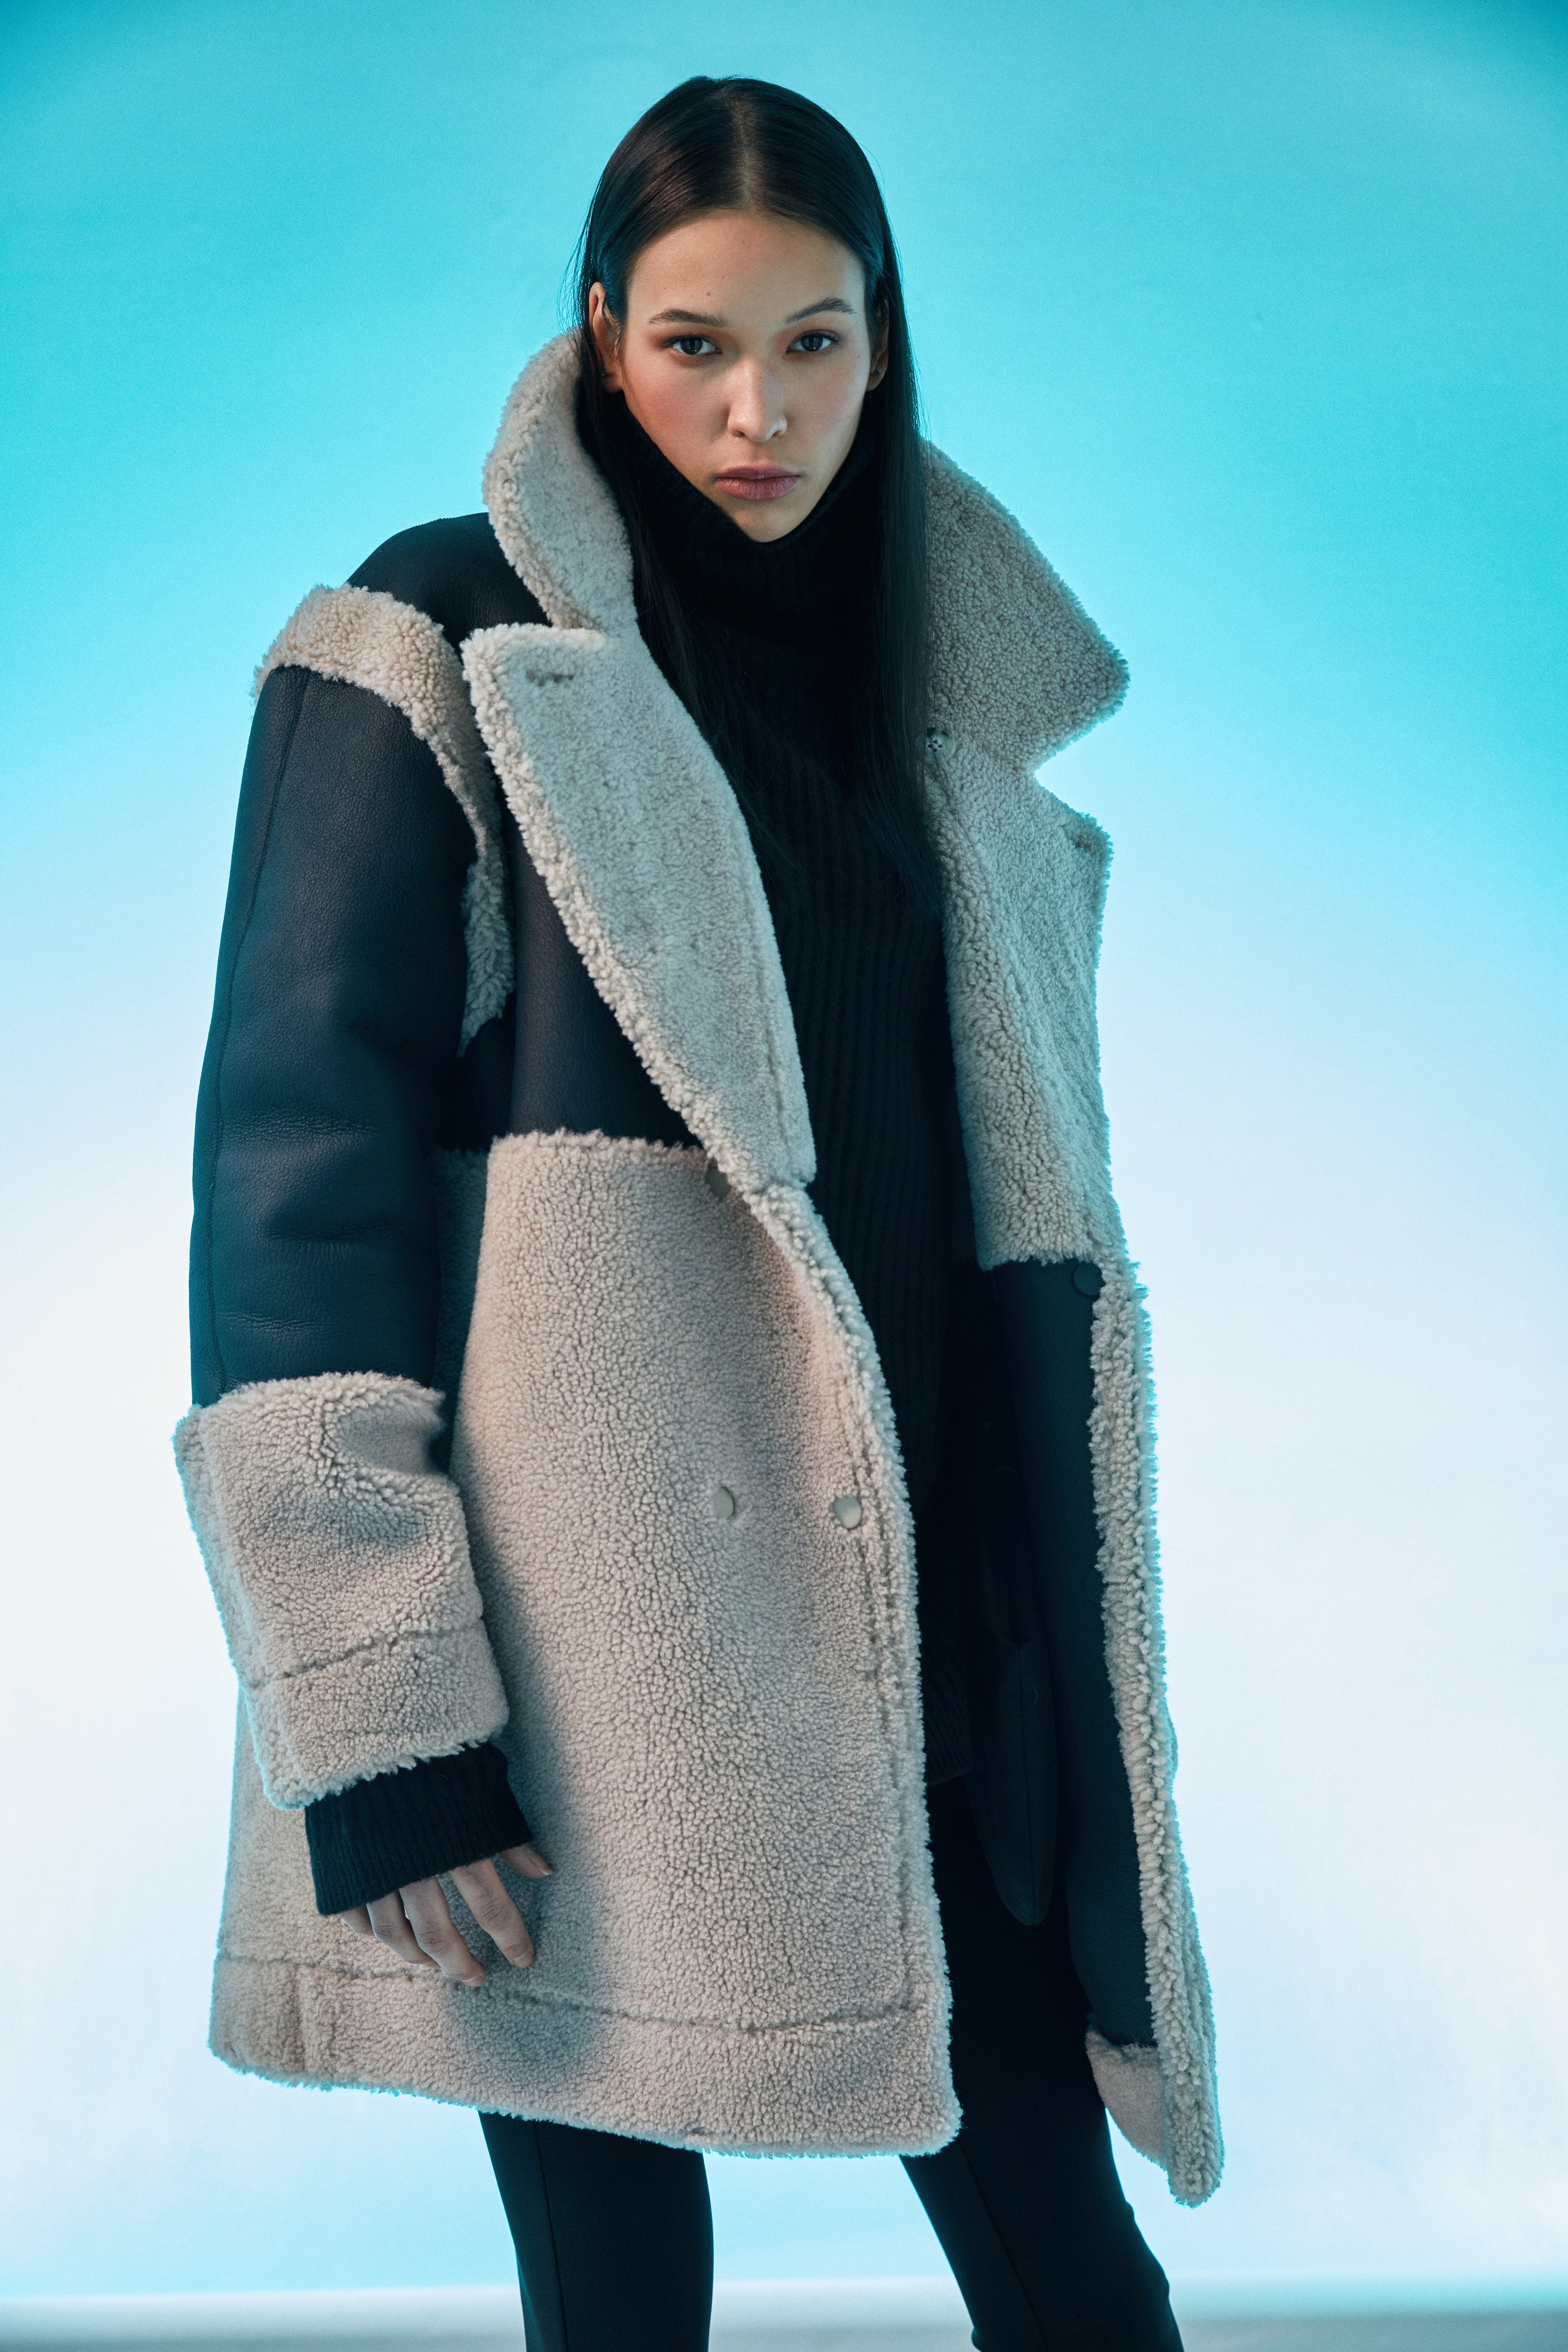 Urban: 33in long. This coat blends the most current fashion Color trends with a timeless style to keep cold winter's bite at bay. Made from the finest Spanish Merino shearling available, this premium coat is comfortable, soft and exceptionally warm. Consistent with key fashion trends it boasts an oversized loose fitted style, has wide sleeves and is straight cut through torso. 